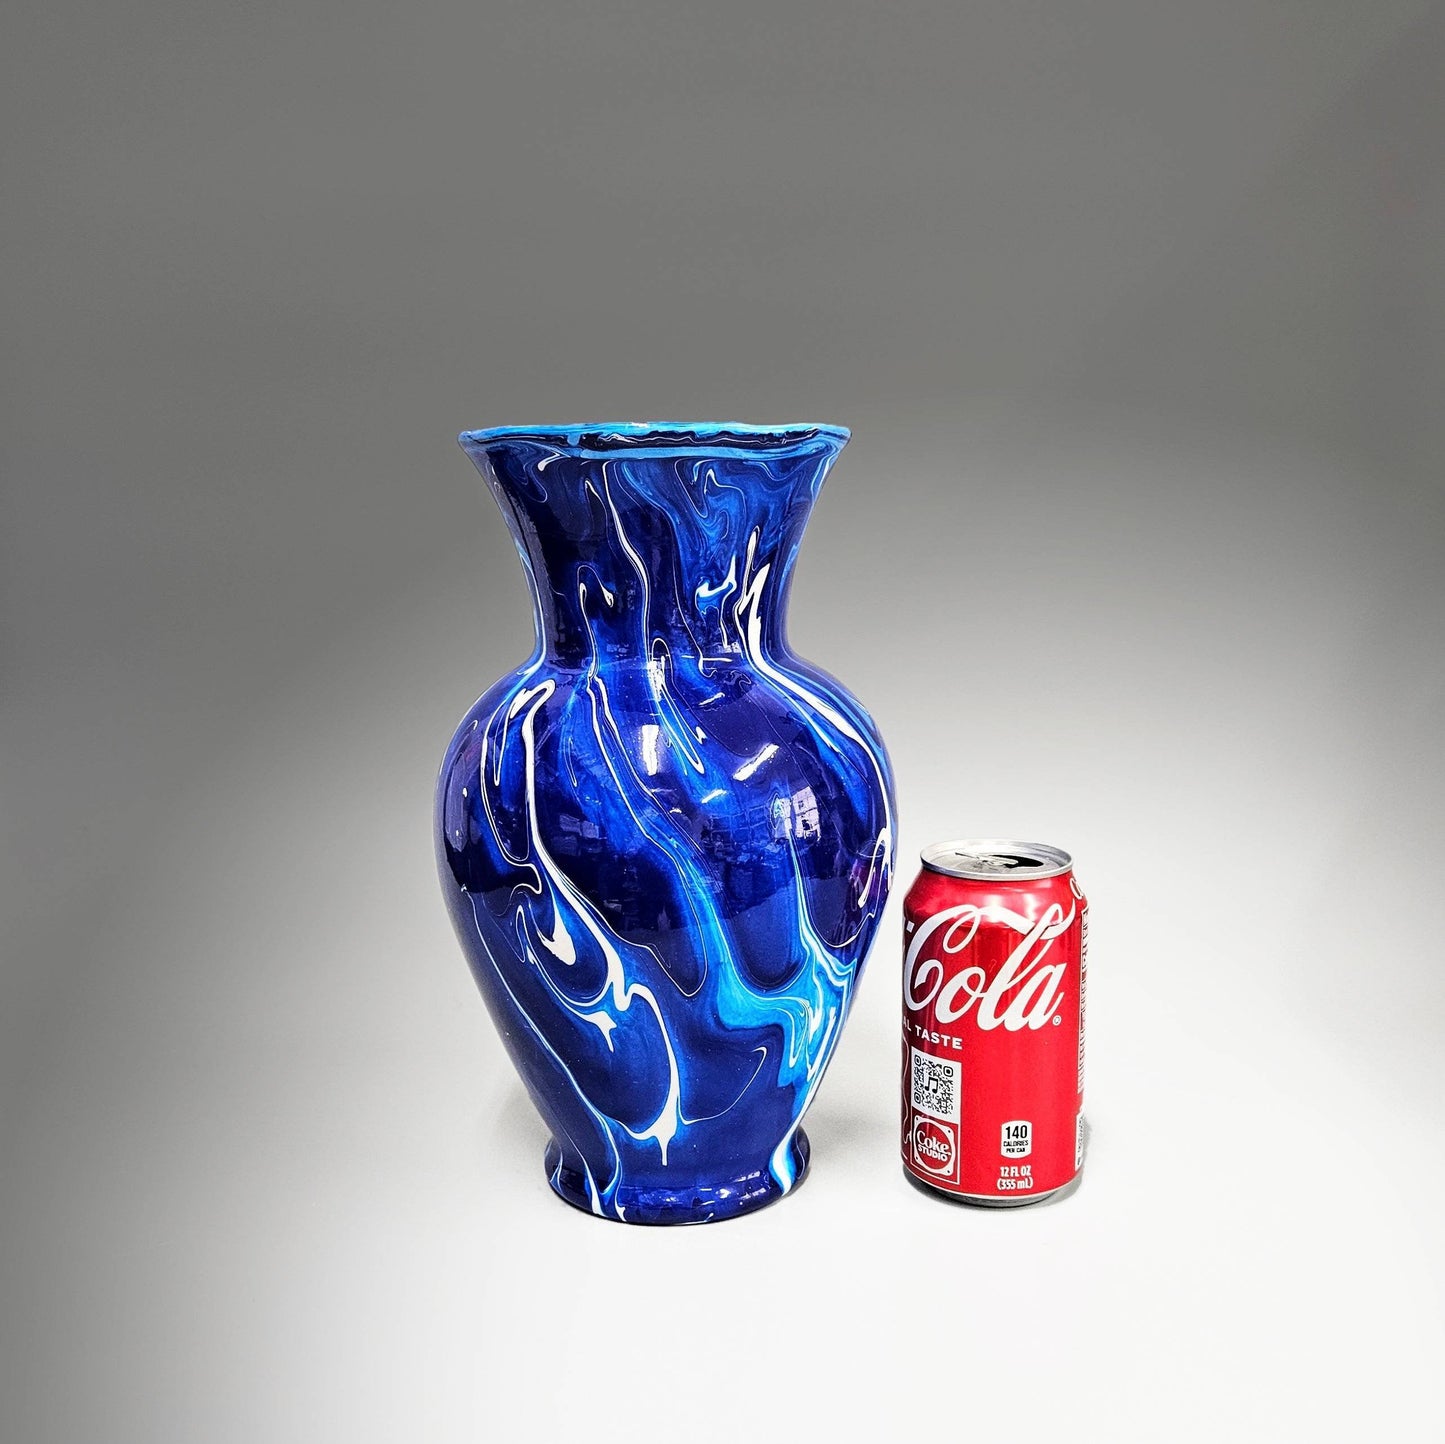 Electric Blue and White Glass Art Vase